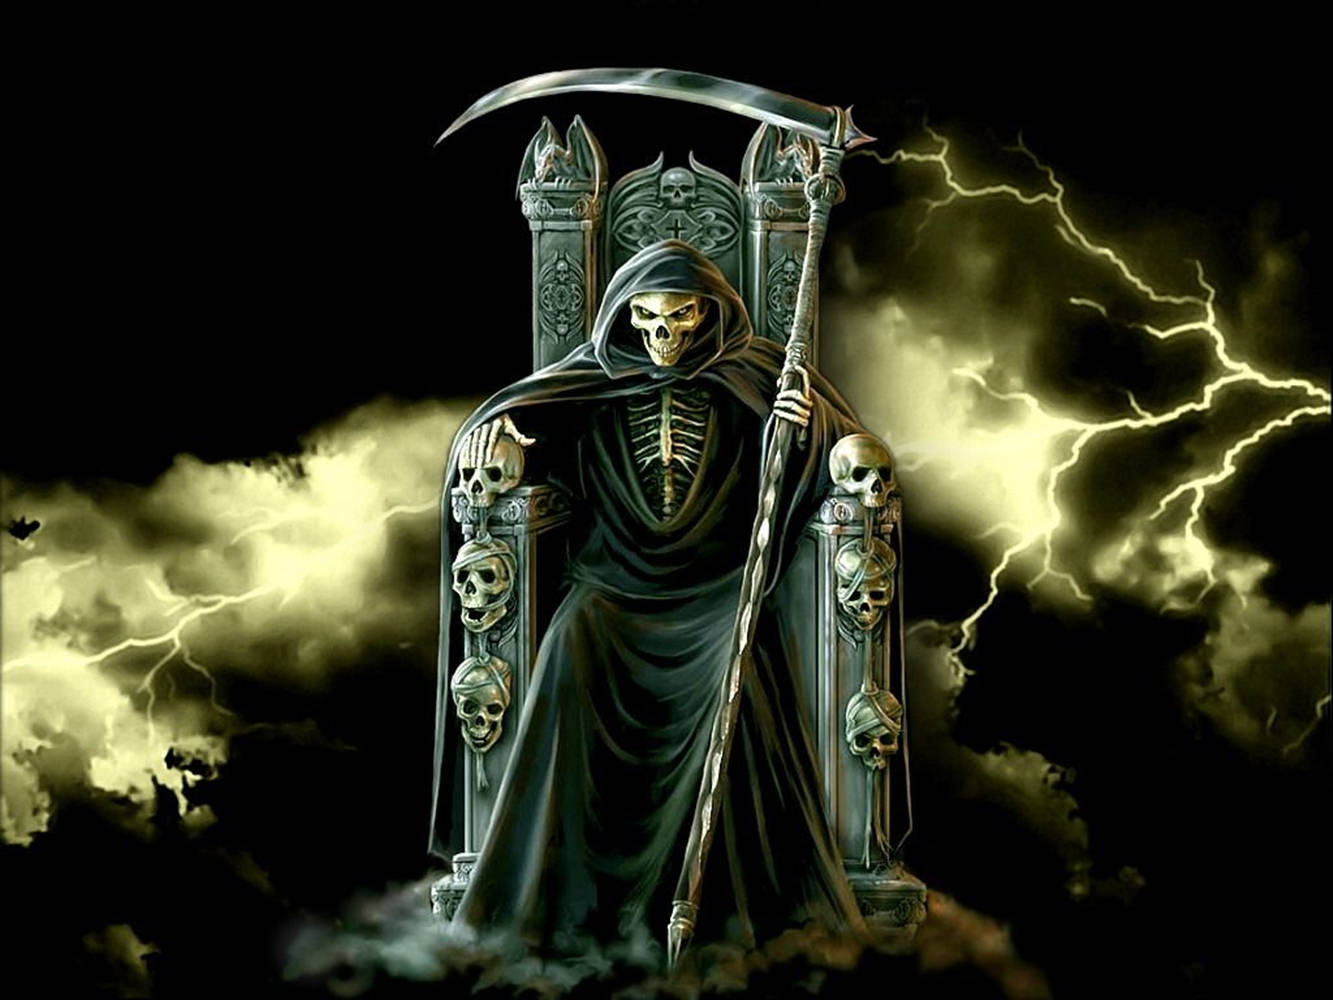 Cool 3d Ghost In Death Throne Wallpaper